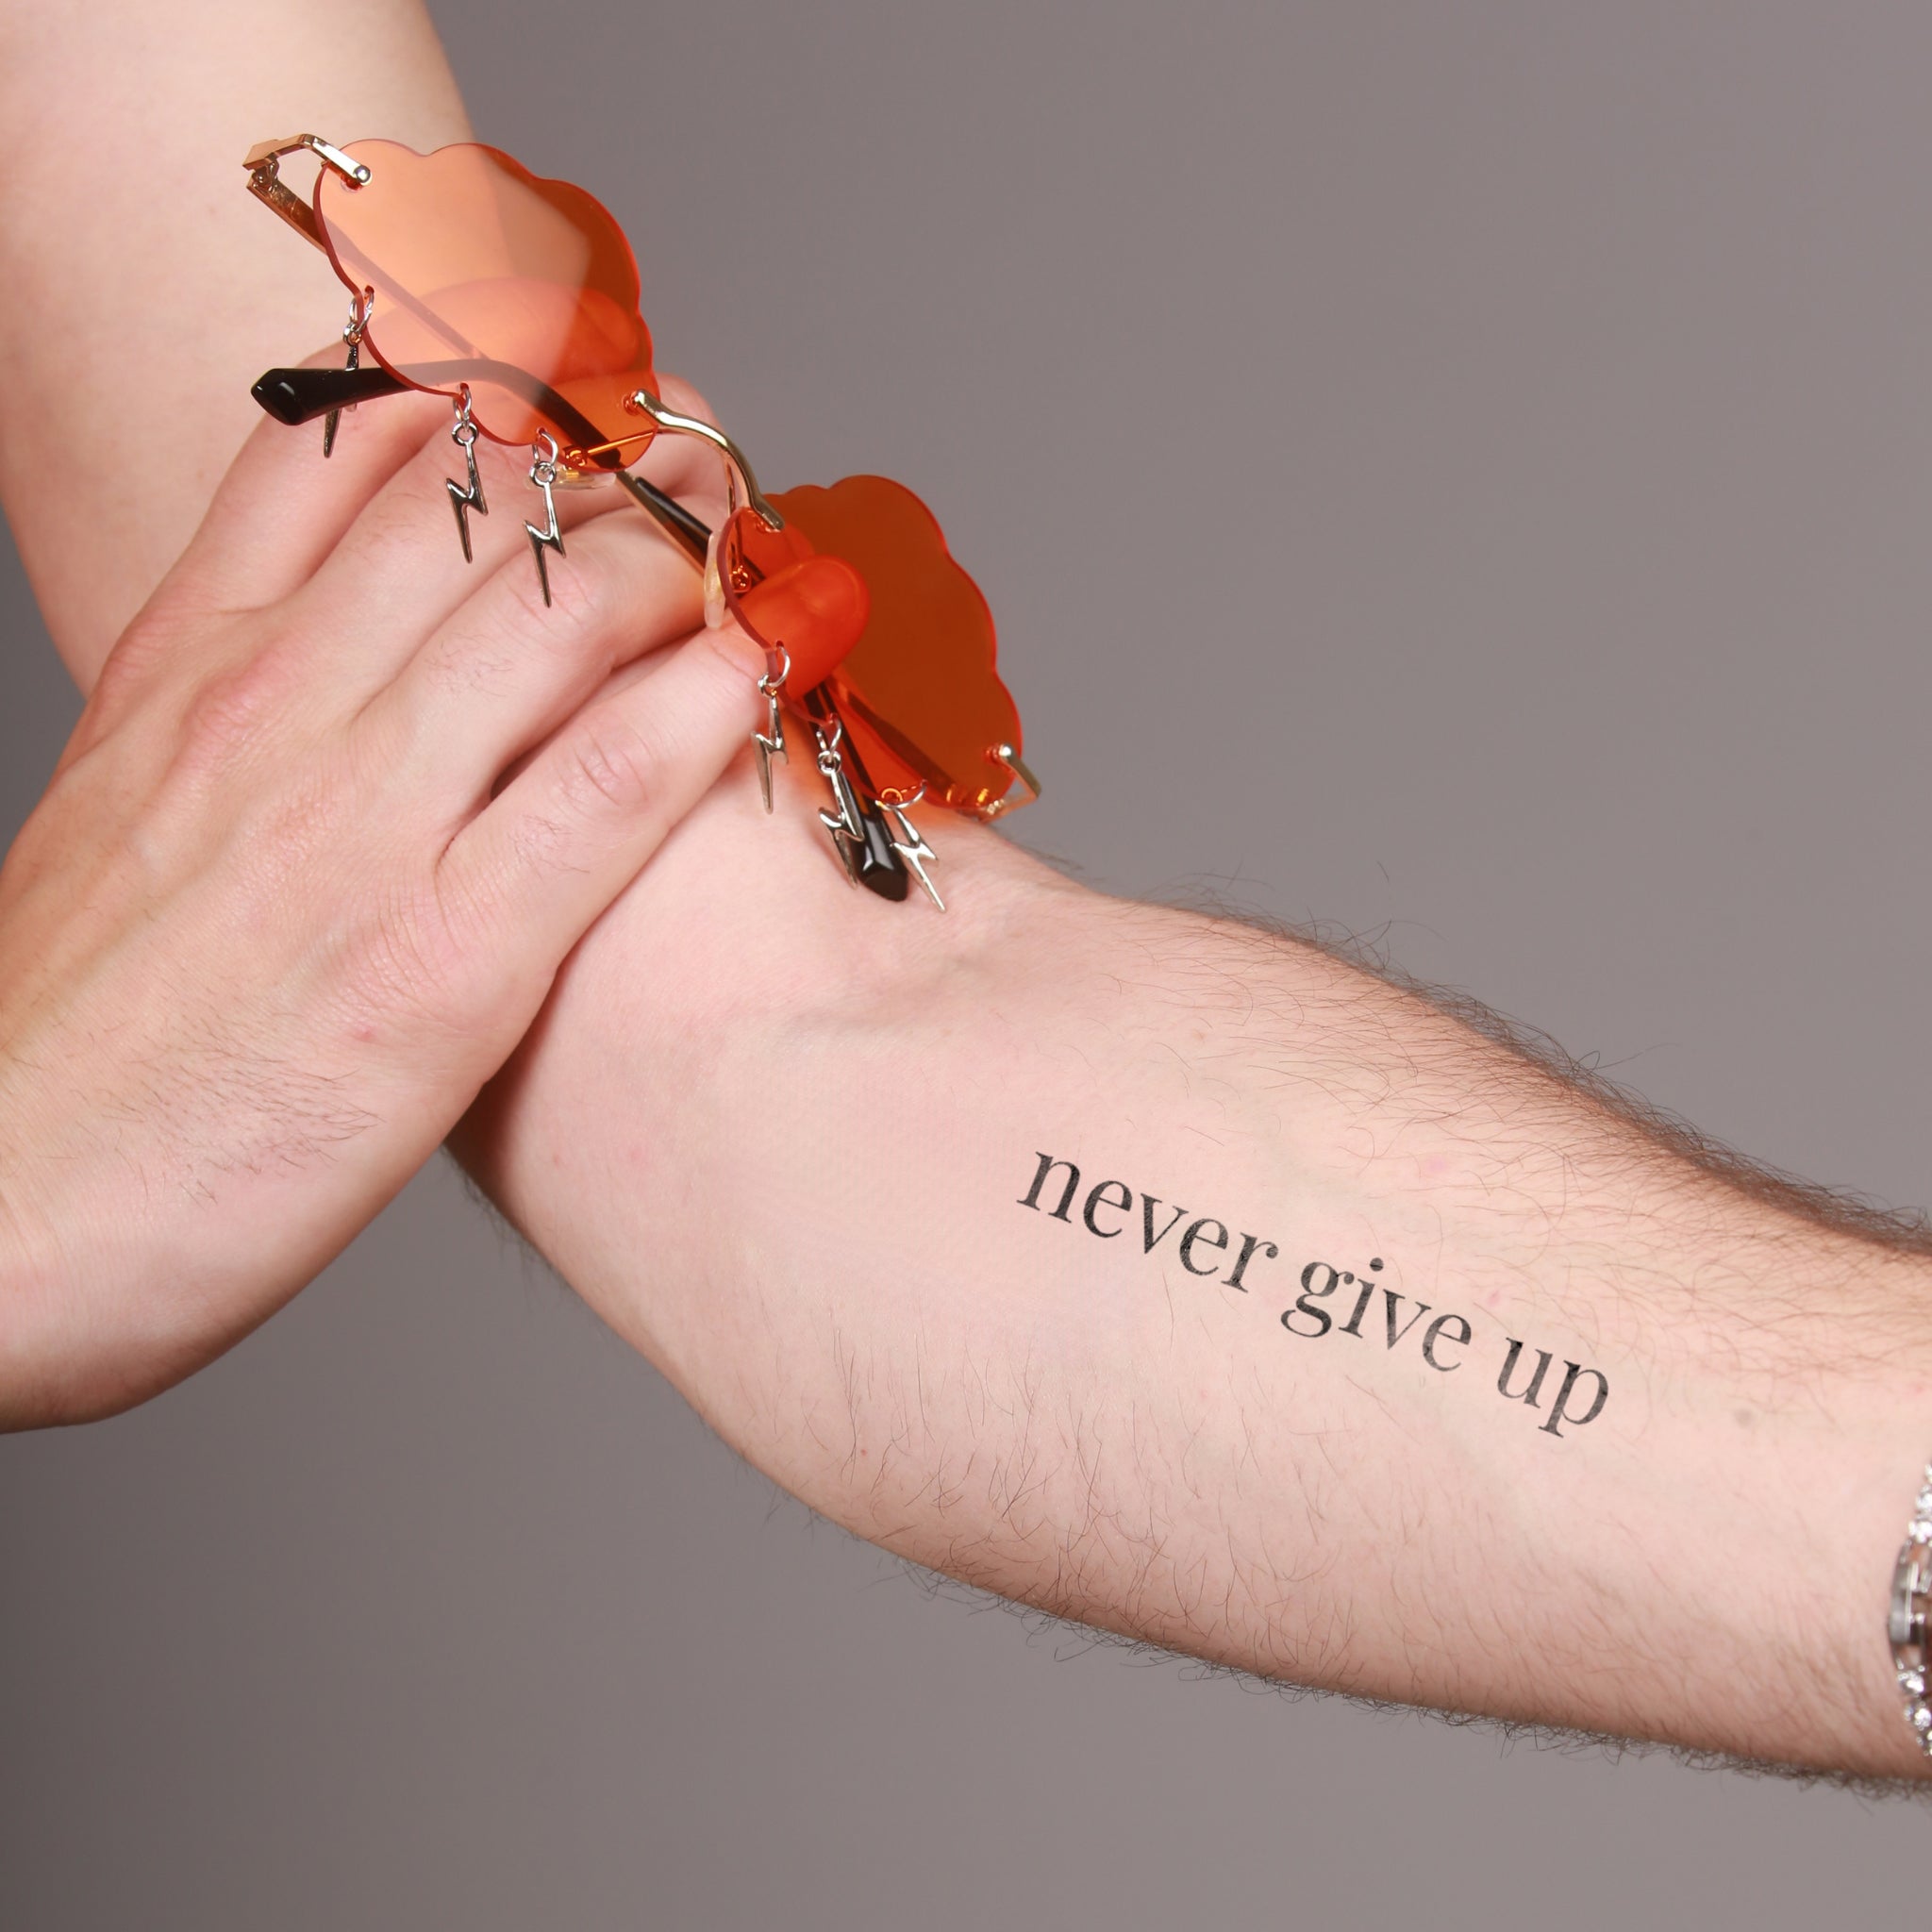 never give up tattoo ideas